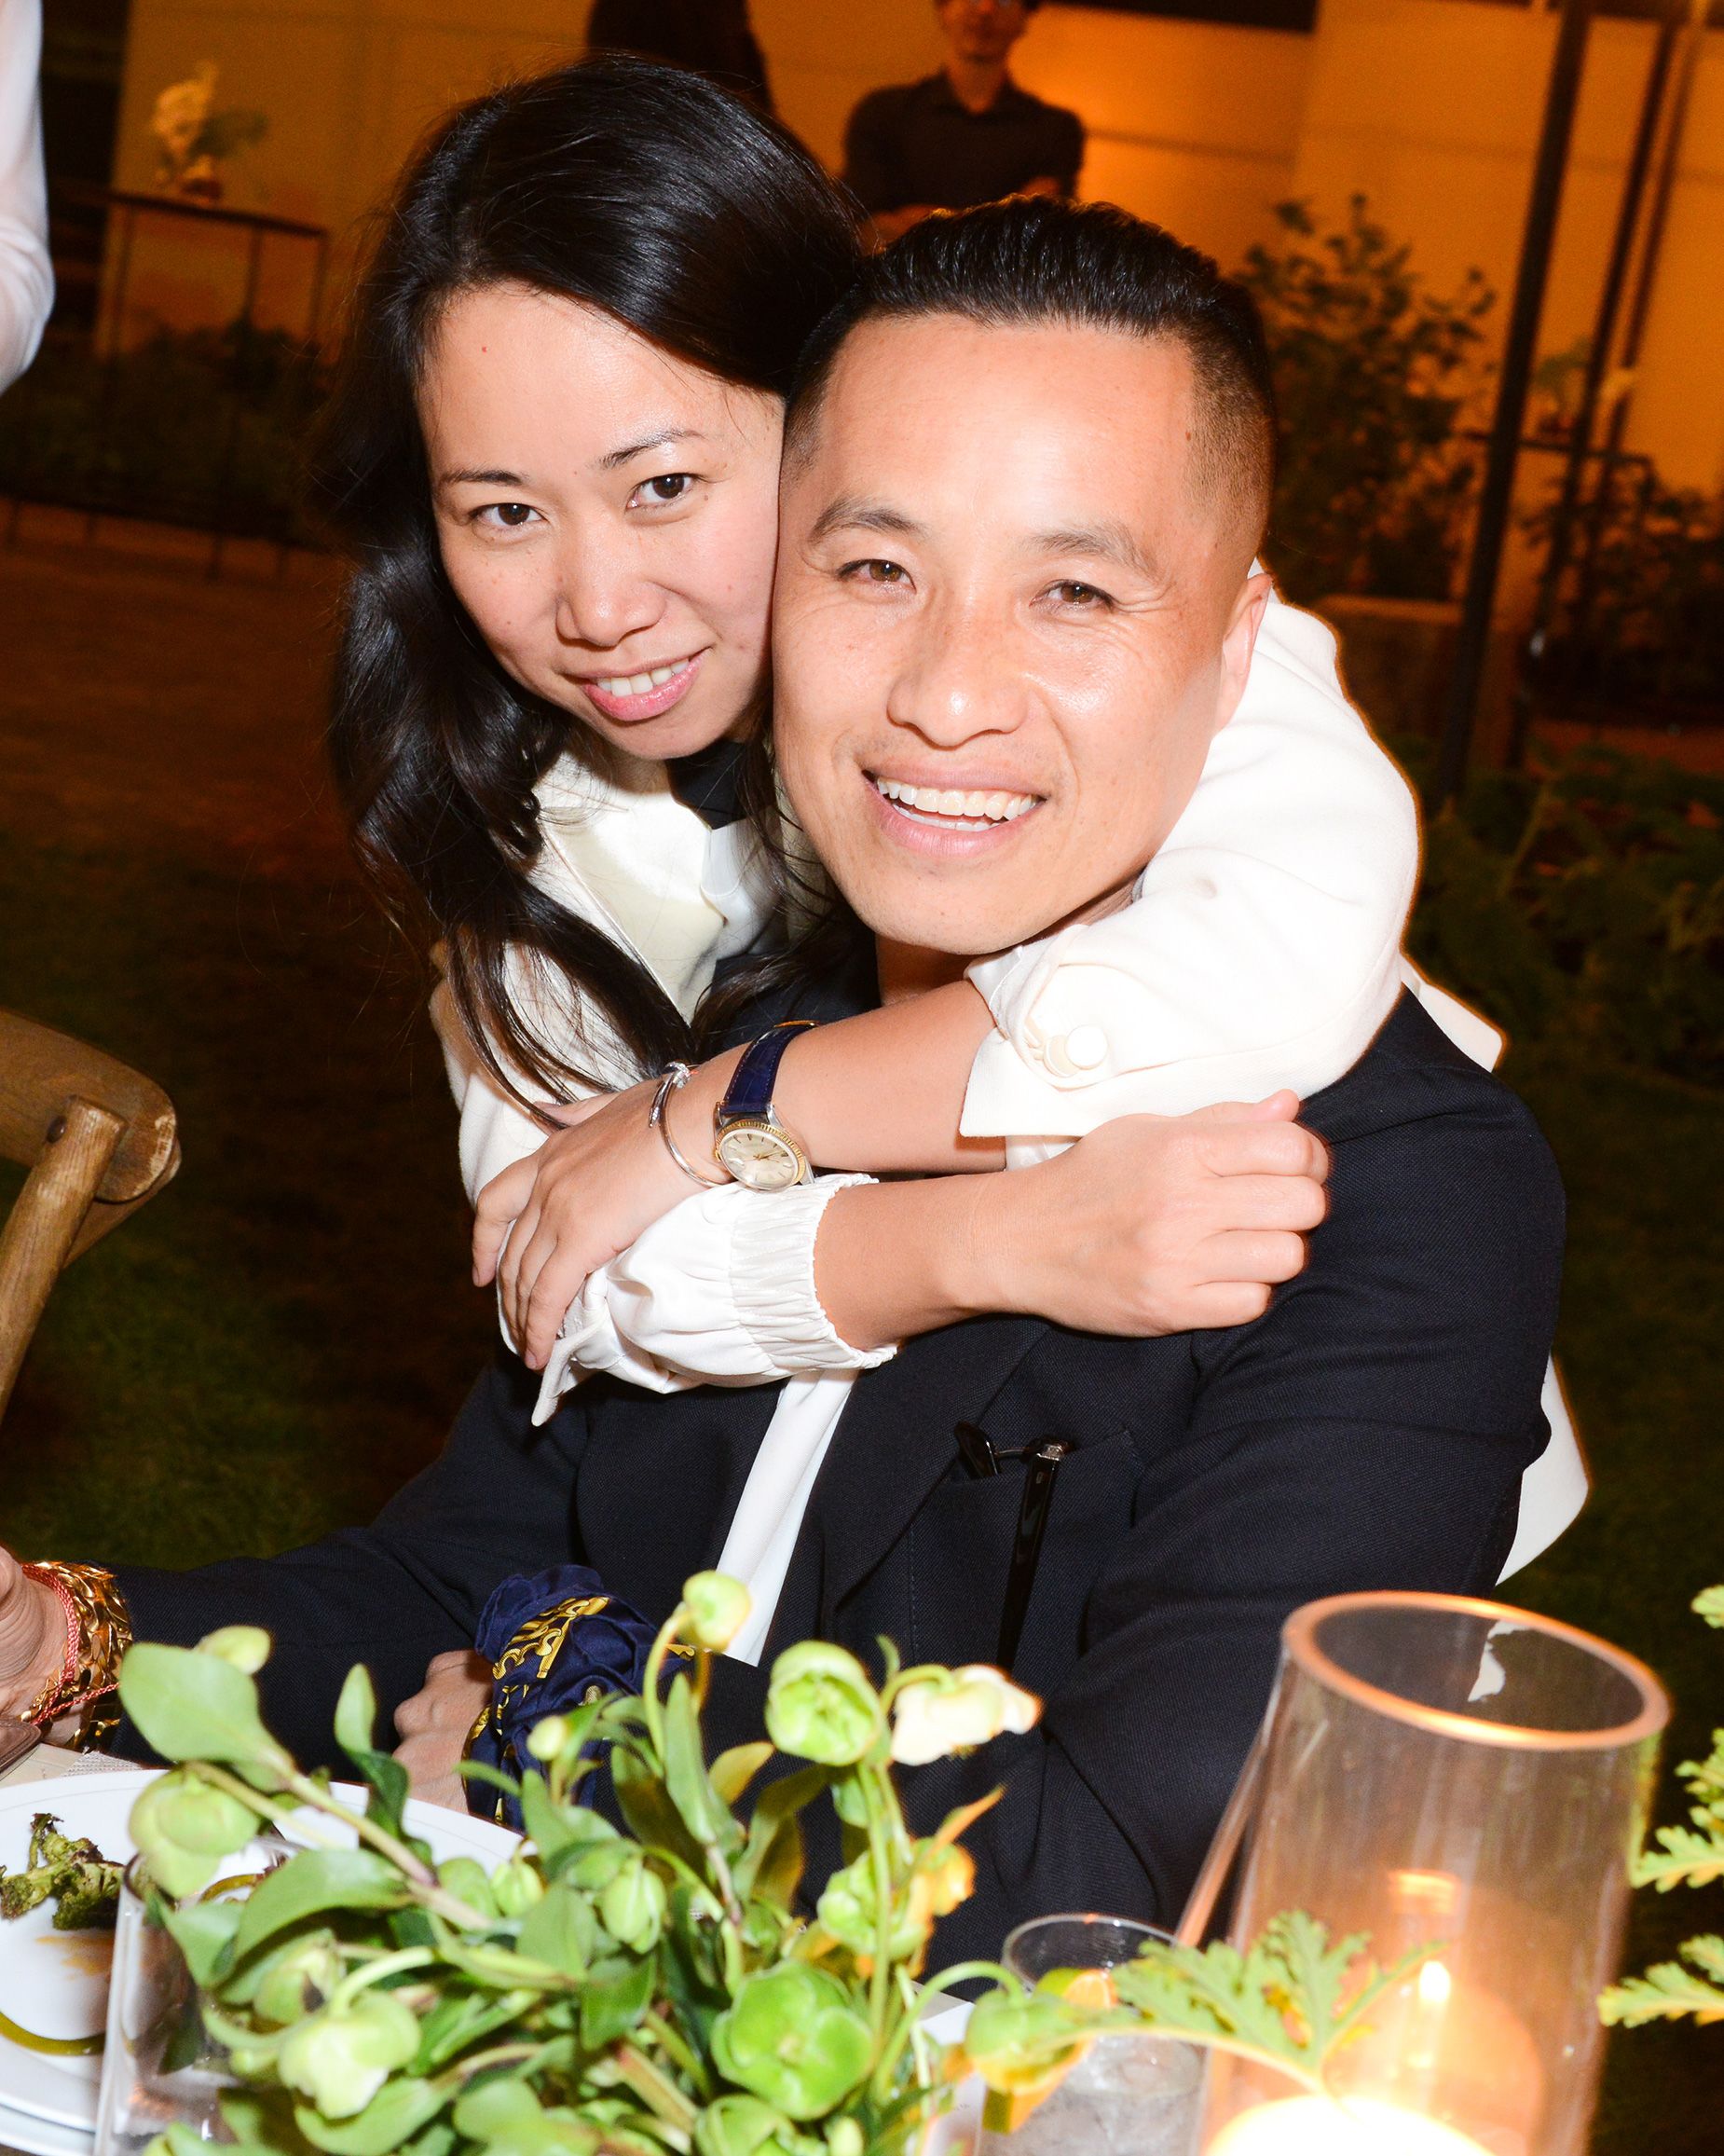 ‘We lost control of who we were.’ Why Phillip Lim’s return to fashion ...